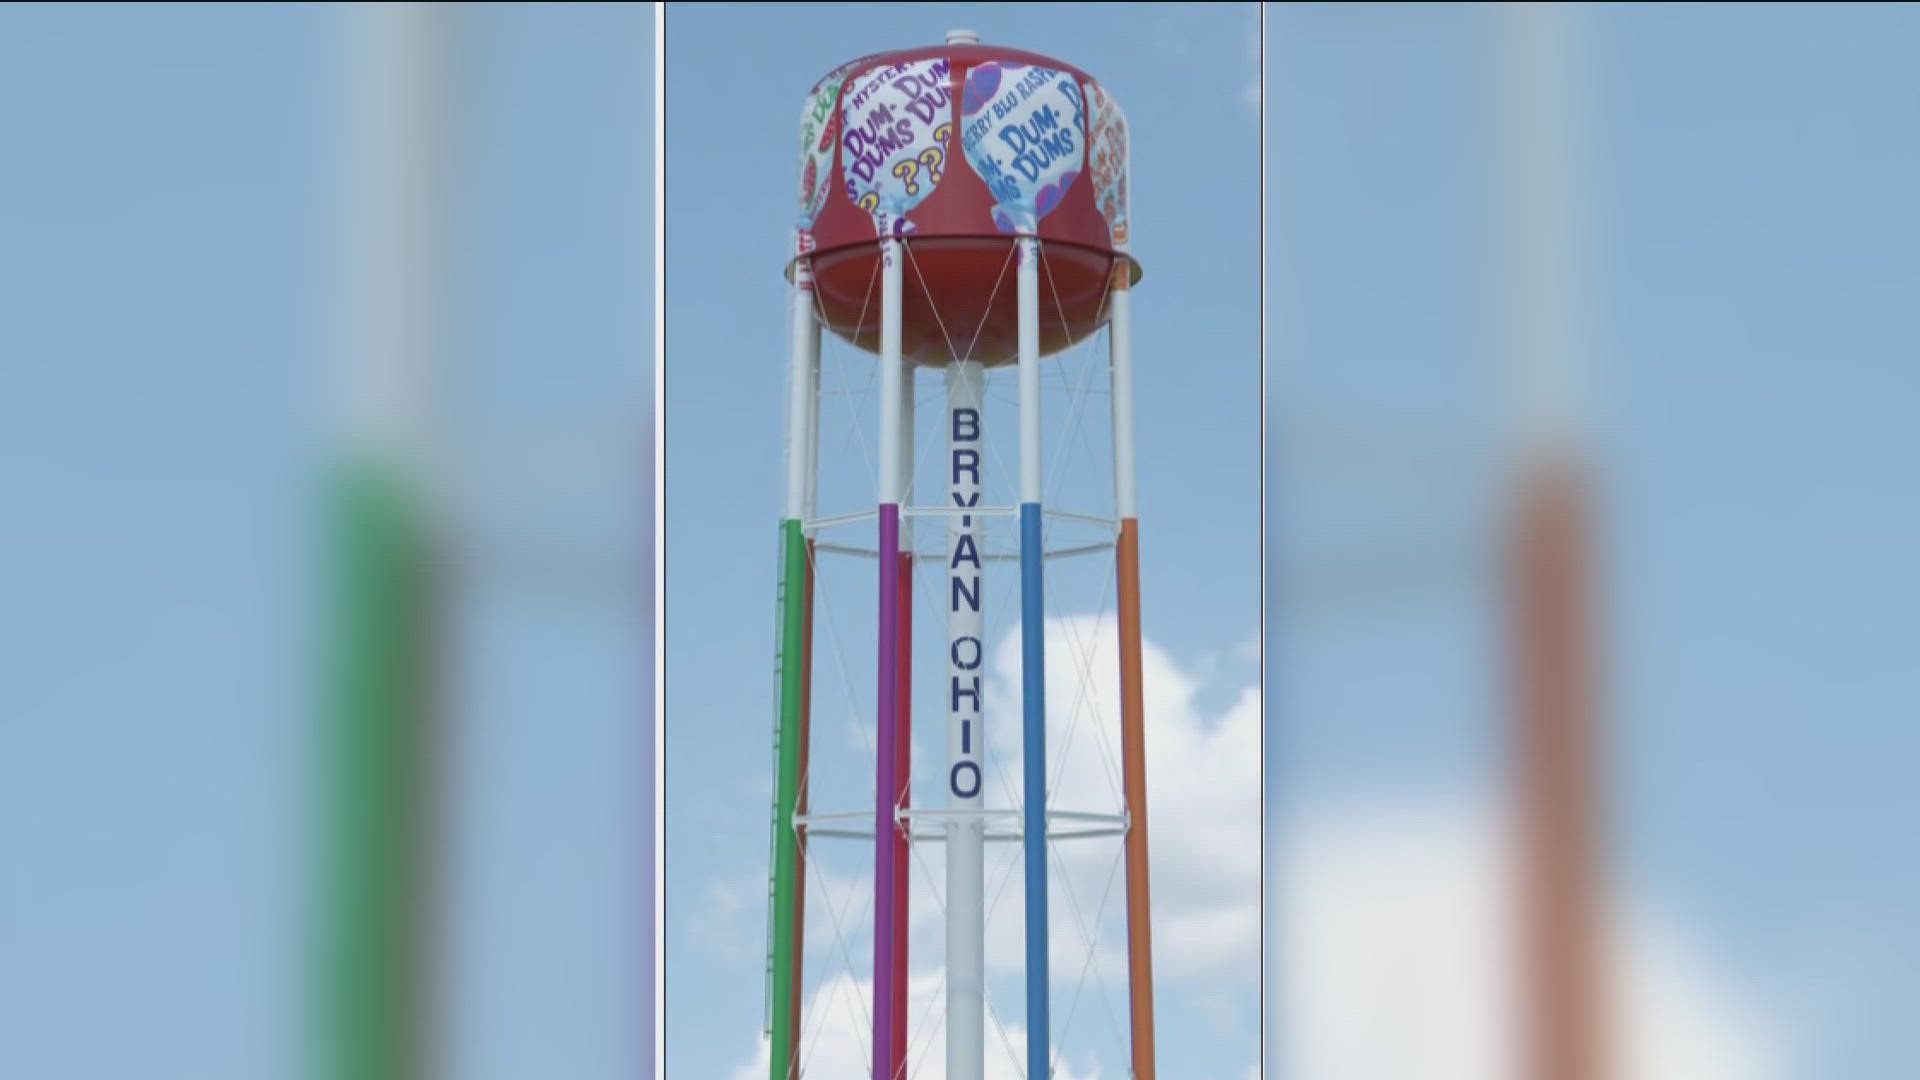 The existing water tower will be refurbished to look like sucker sticks.